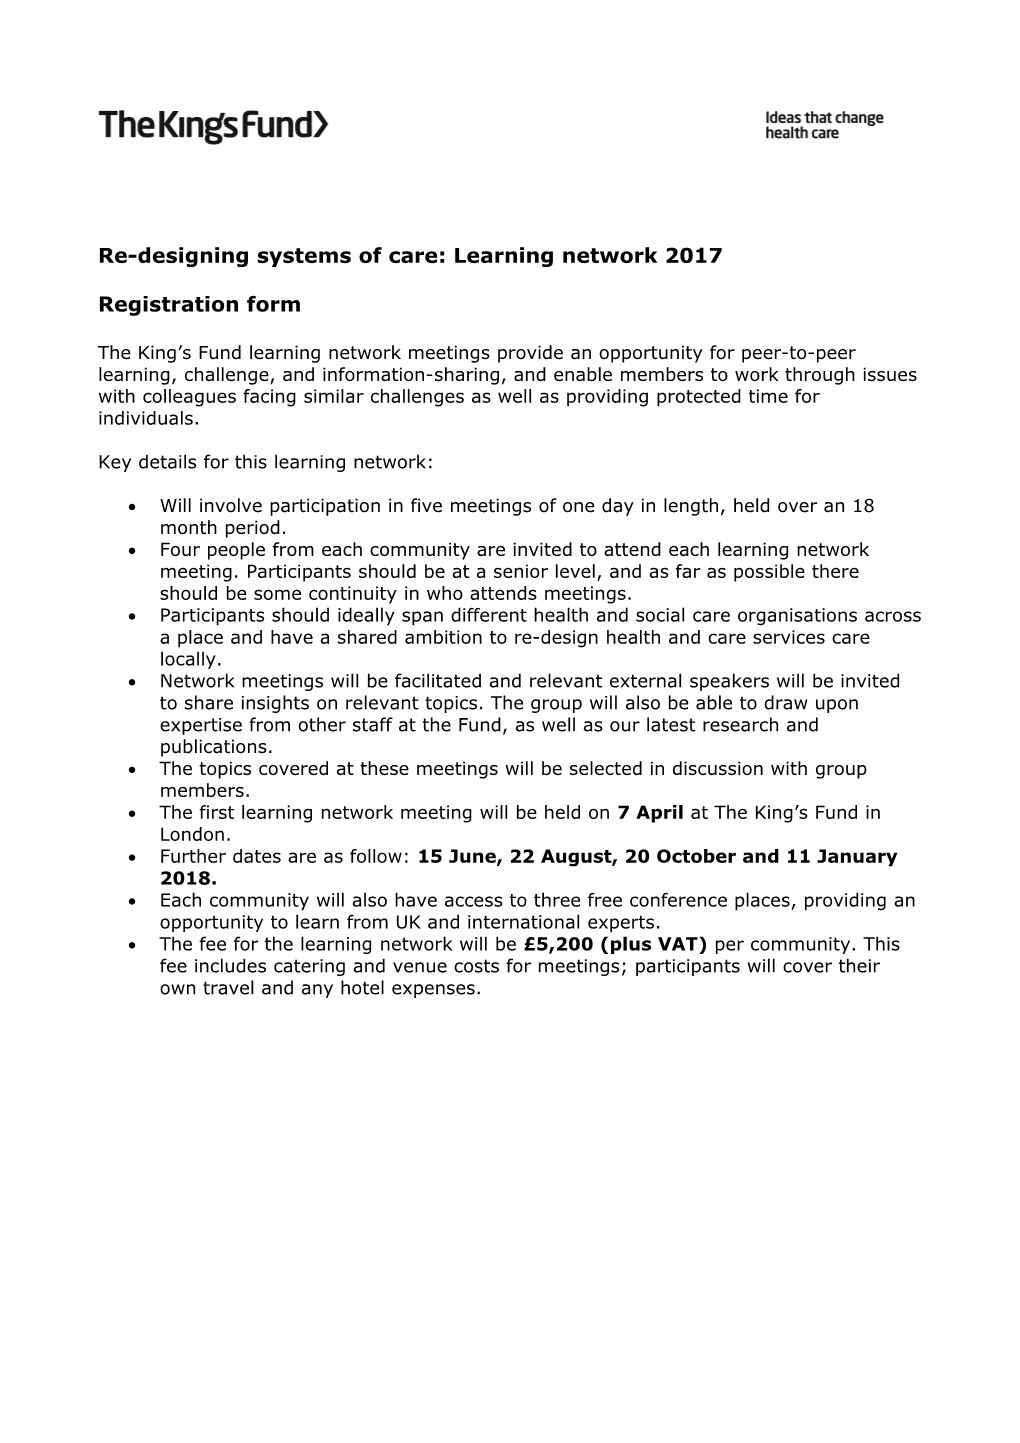 Registration Form IC Learning Network 5